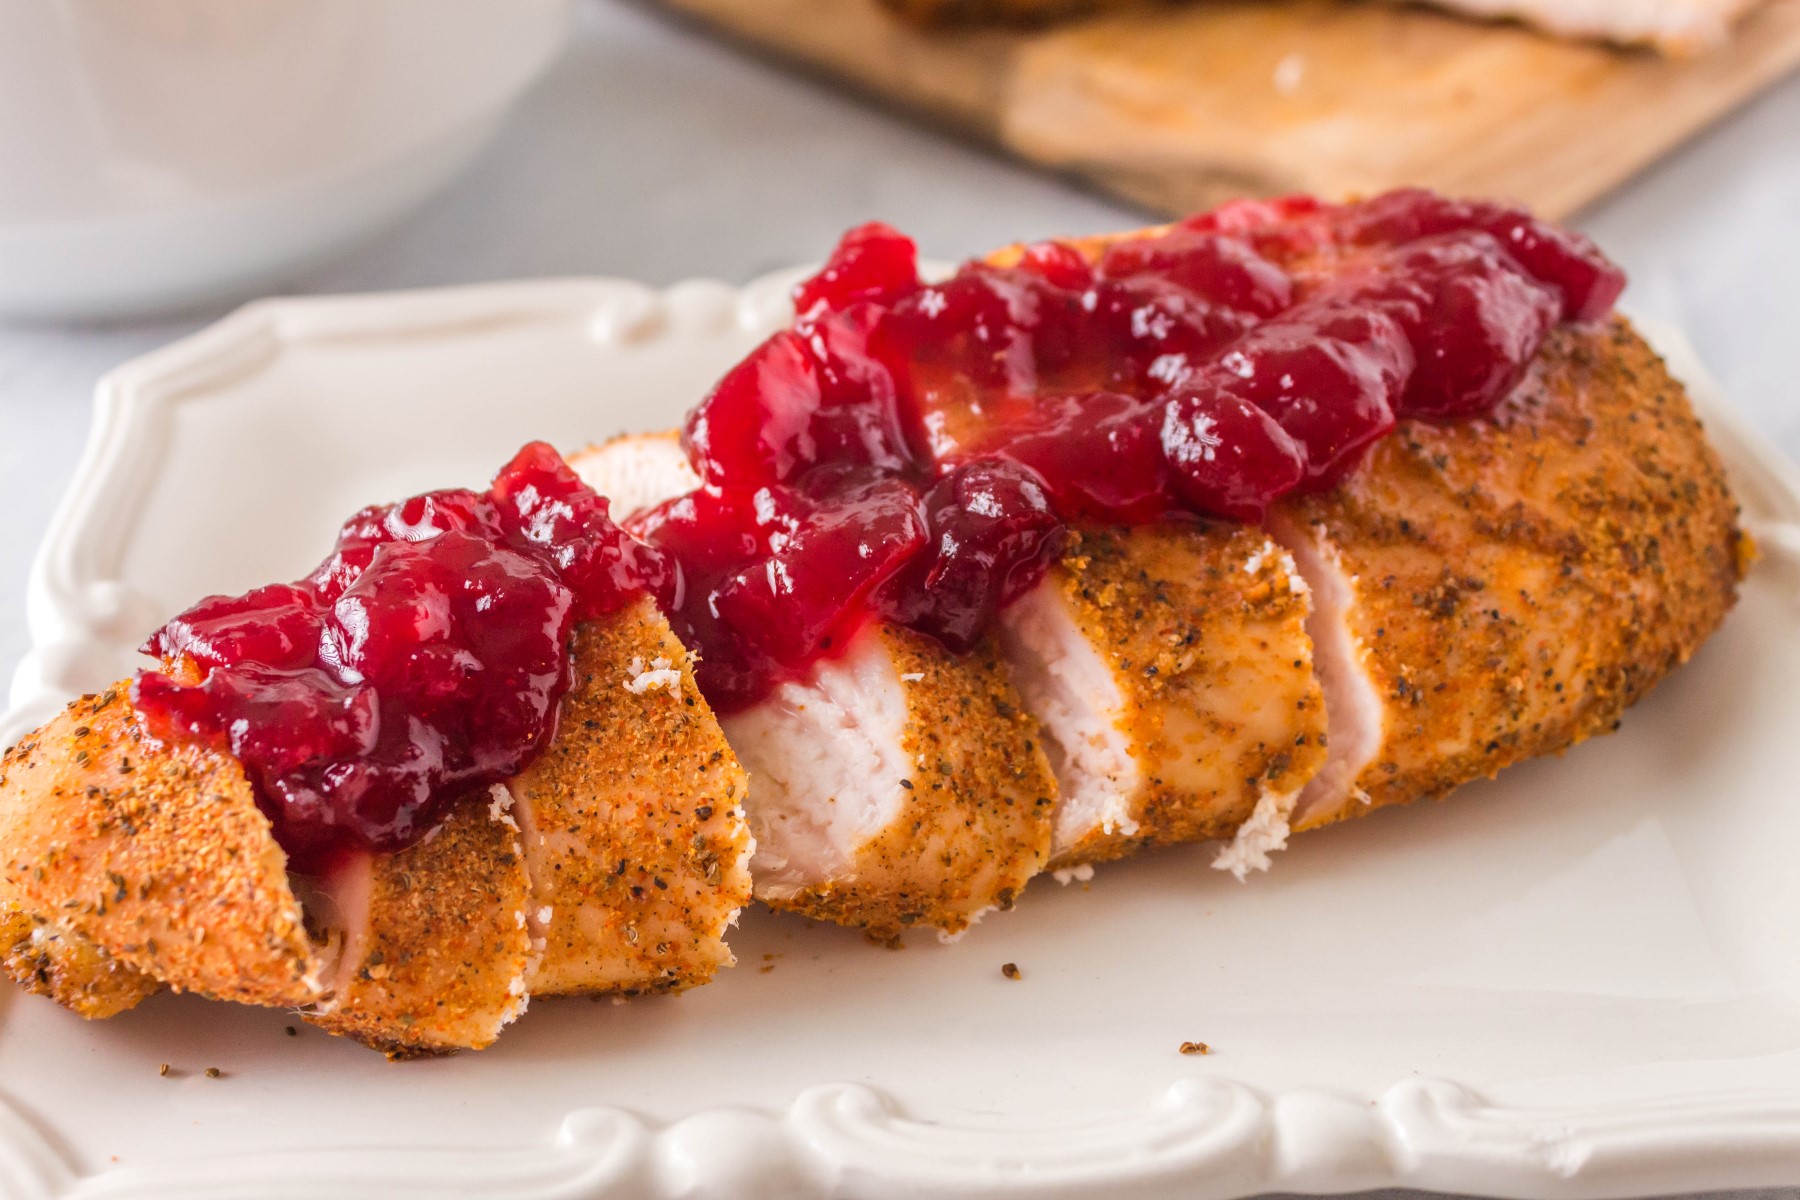 Sliced smoked chicken breast with cranberry sauce on top.